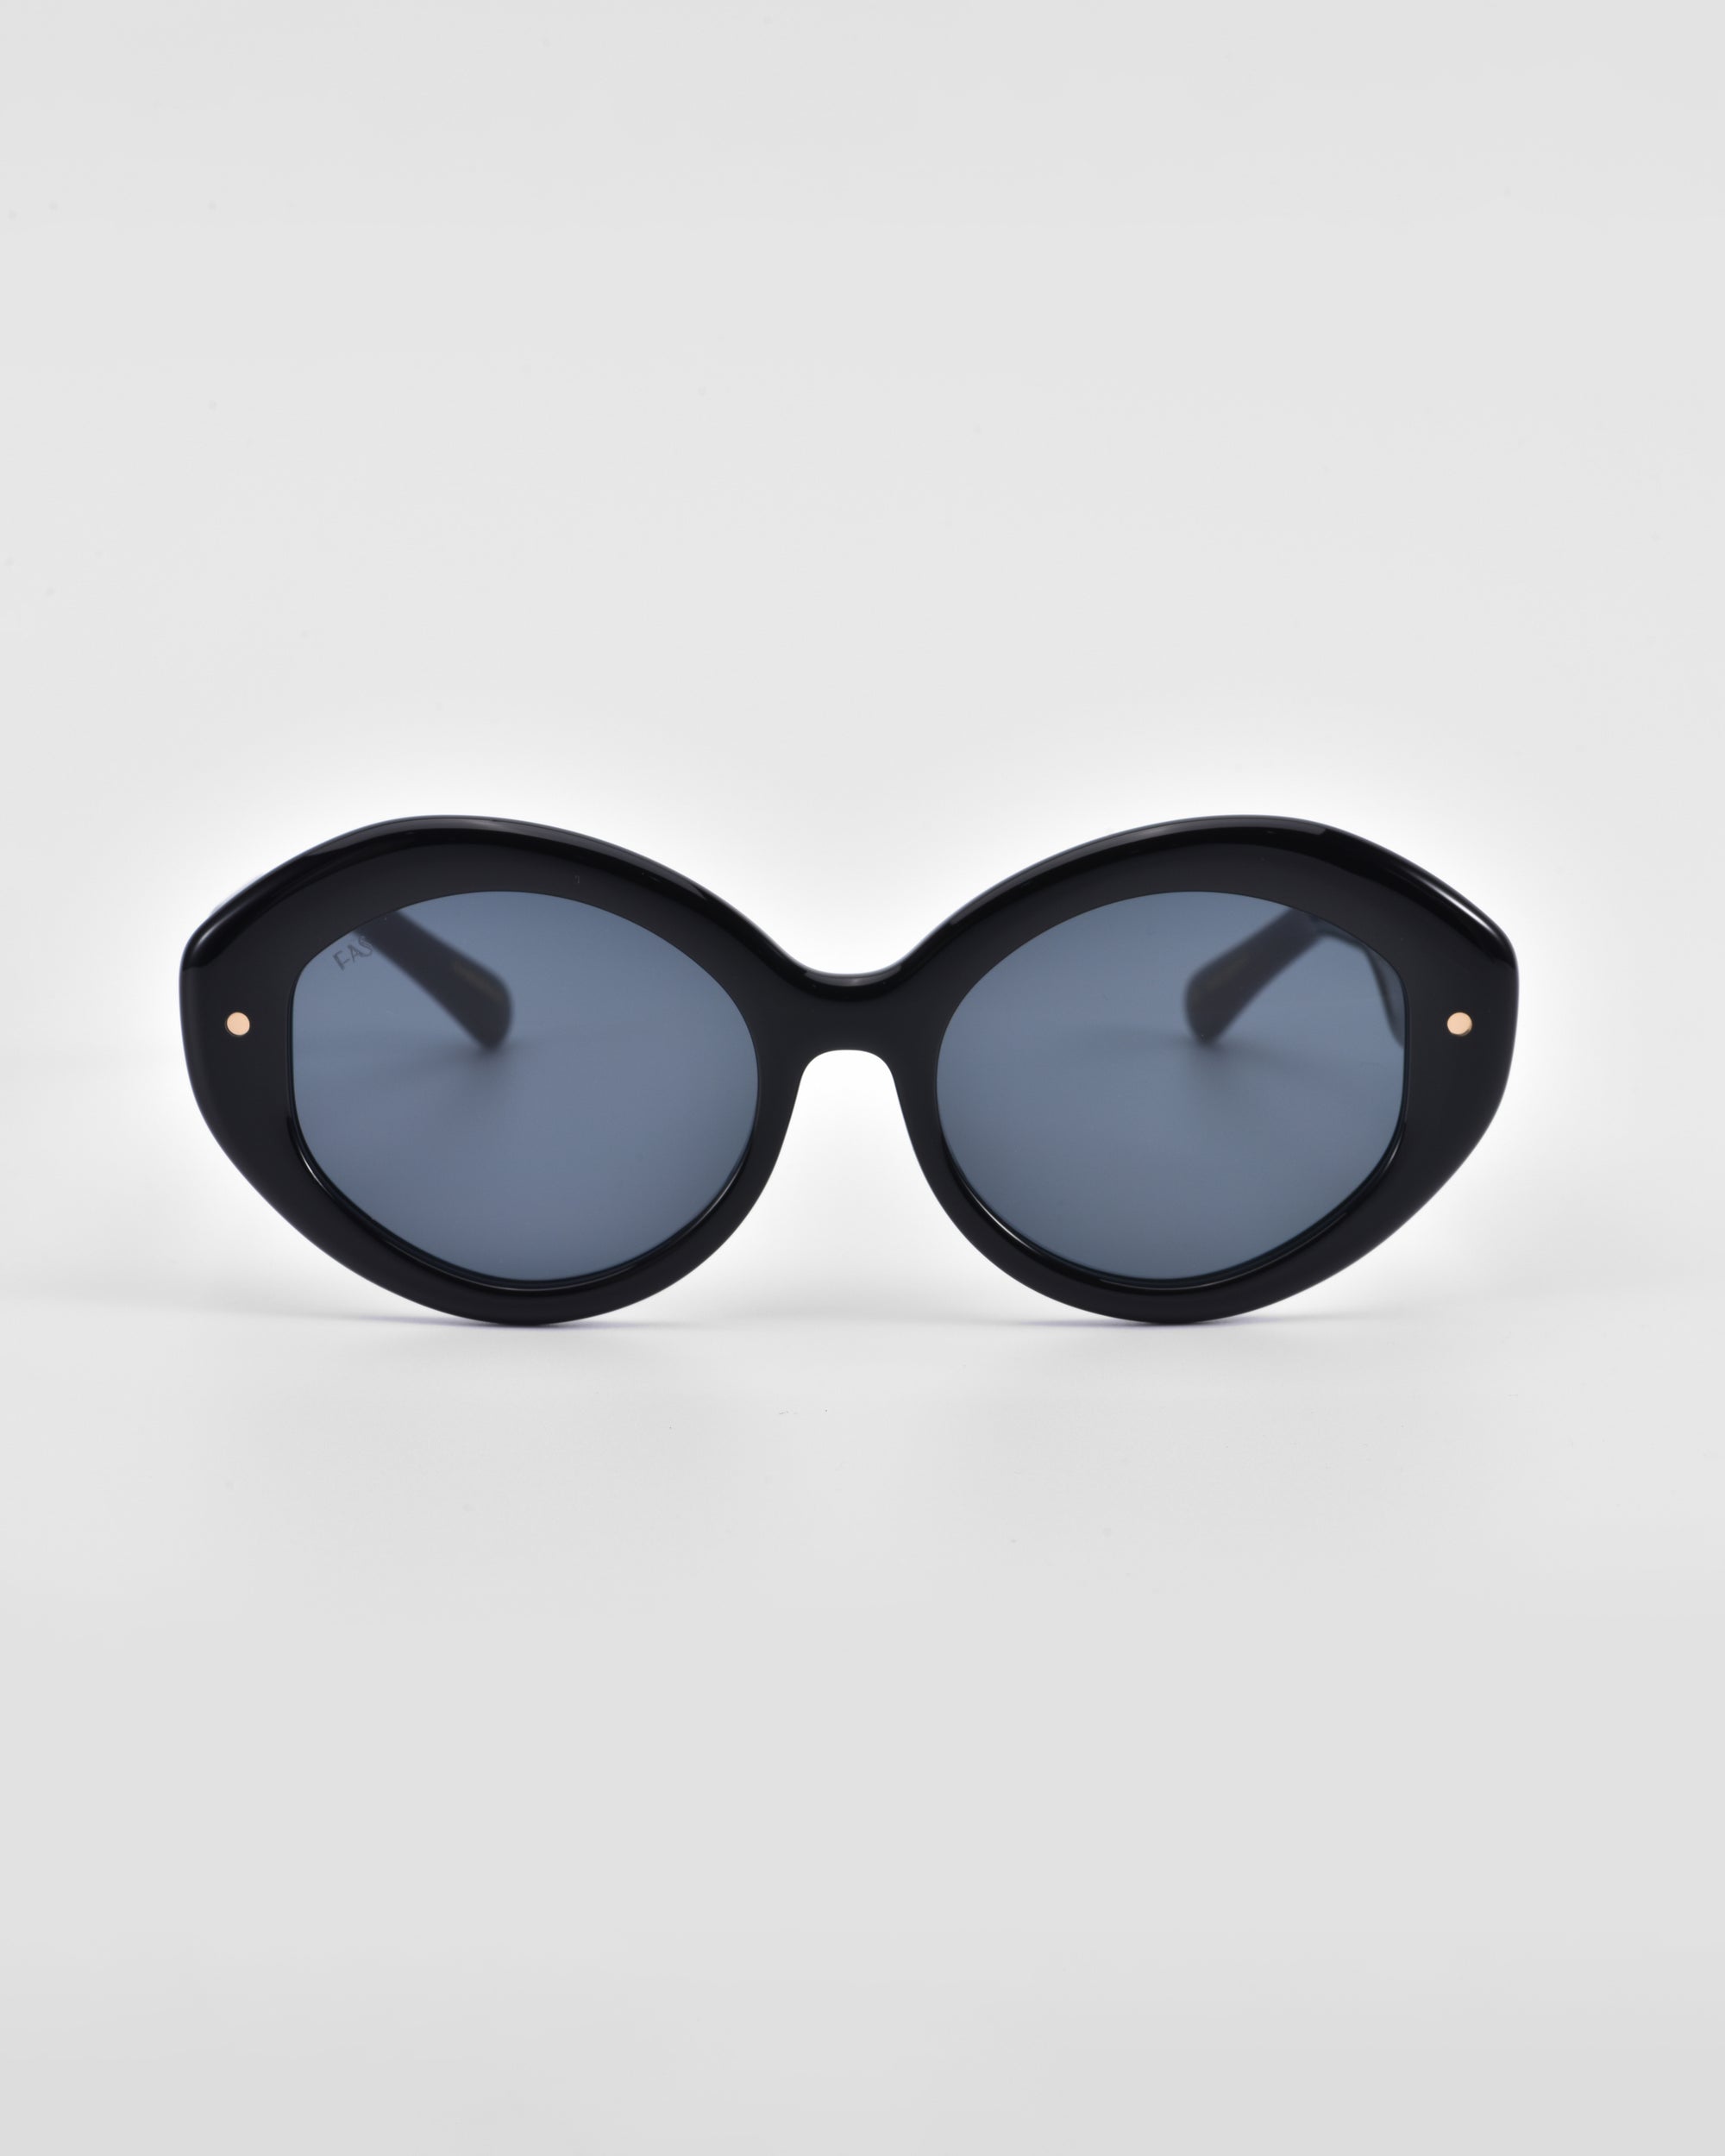 A pair of large, round, black Helios sunglasses with dark lenses by For Art&#39;s Sake®. The thick frame features two small metal accents near the hinges, adding a touch of sophistication. This piece of luxury eyewear is set against a plain light gray background.